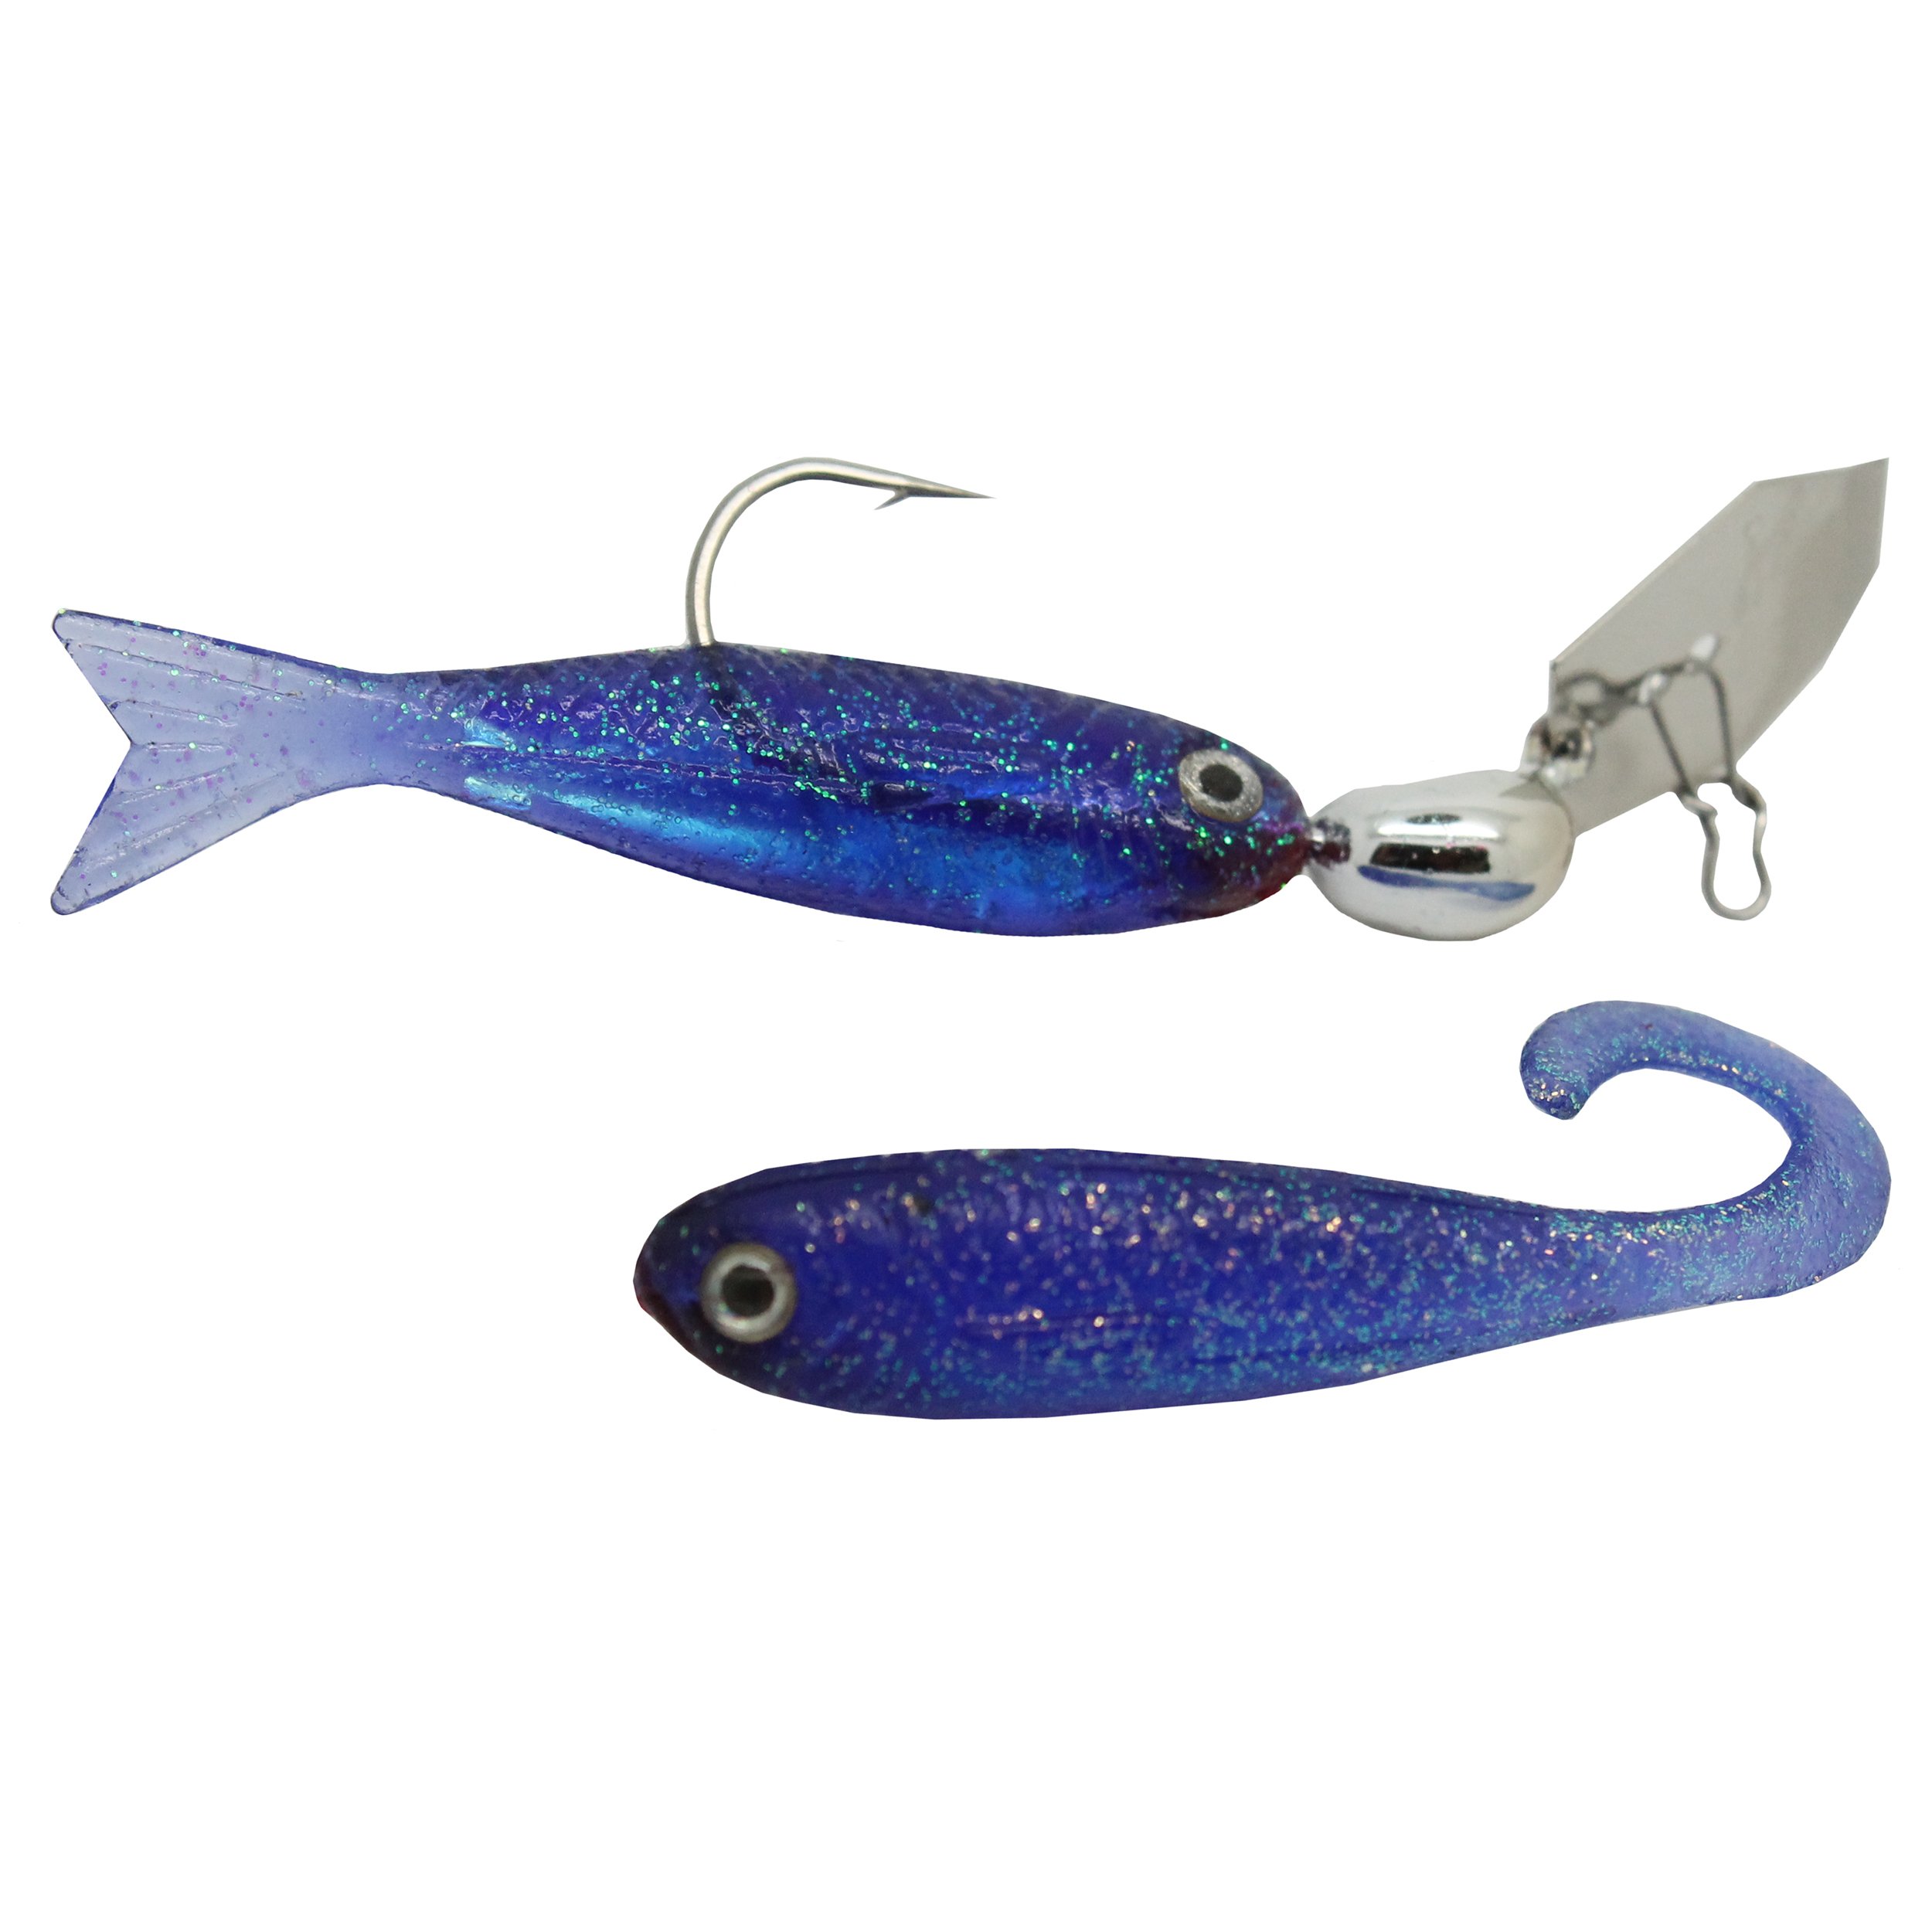 Z-man Flashback Mini Swim Jig  Up to 32% Off Free Shipping over $49!